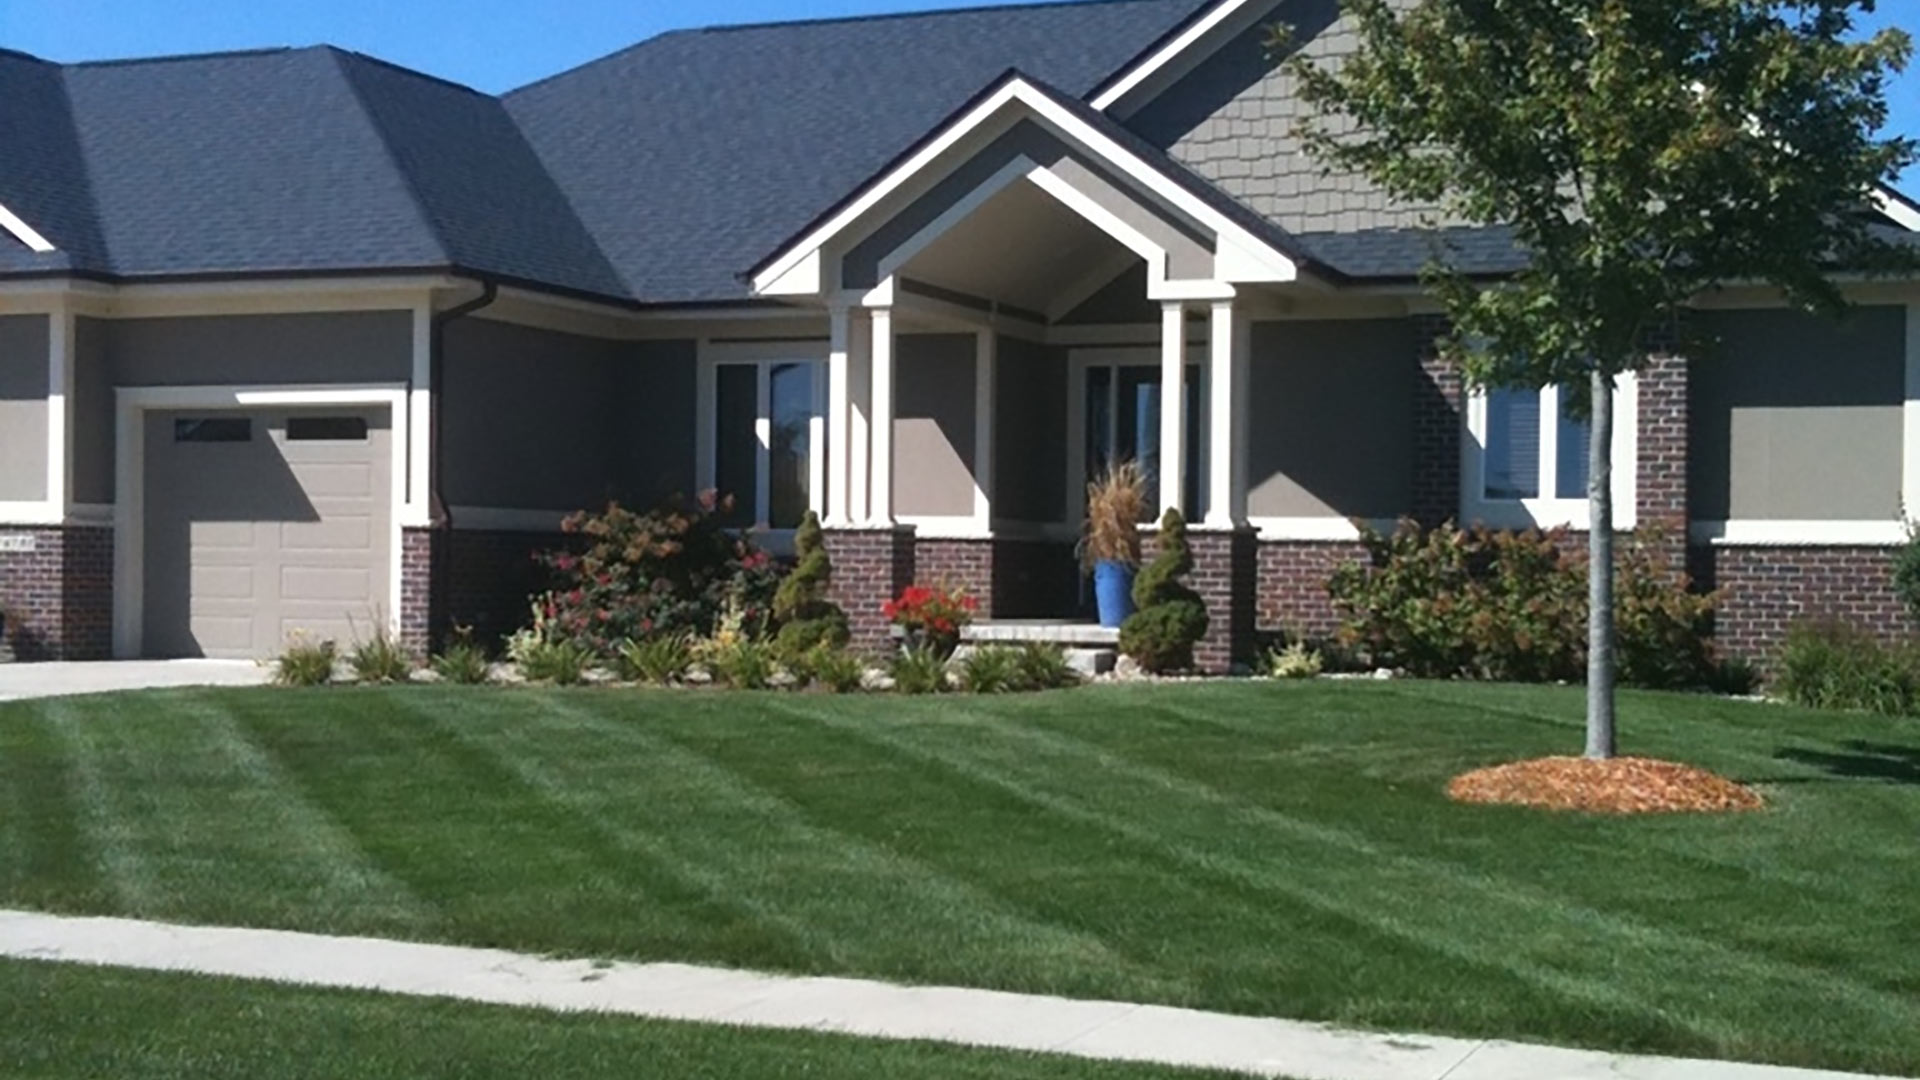 Home in Ankeny, IA using our lawn and landscape services.